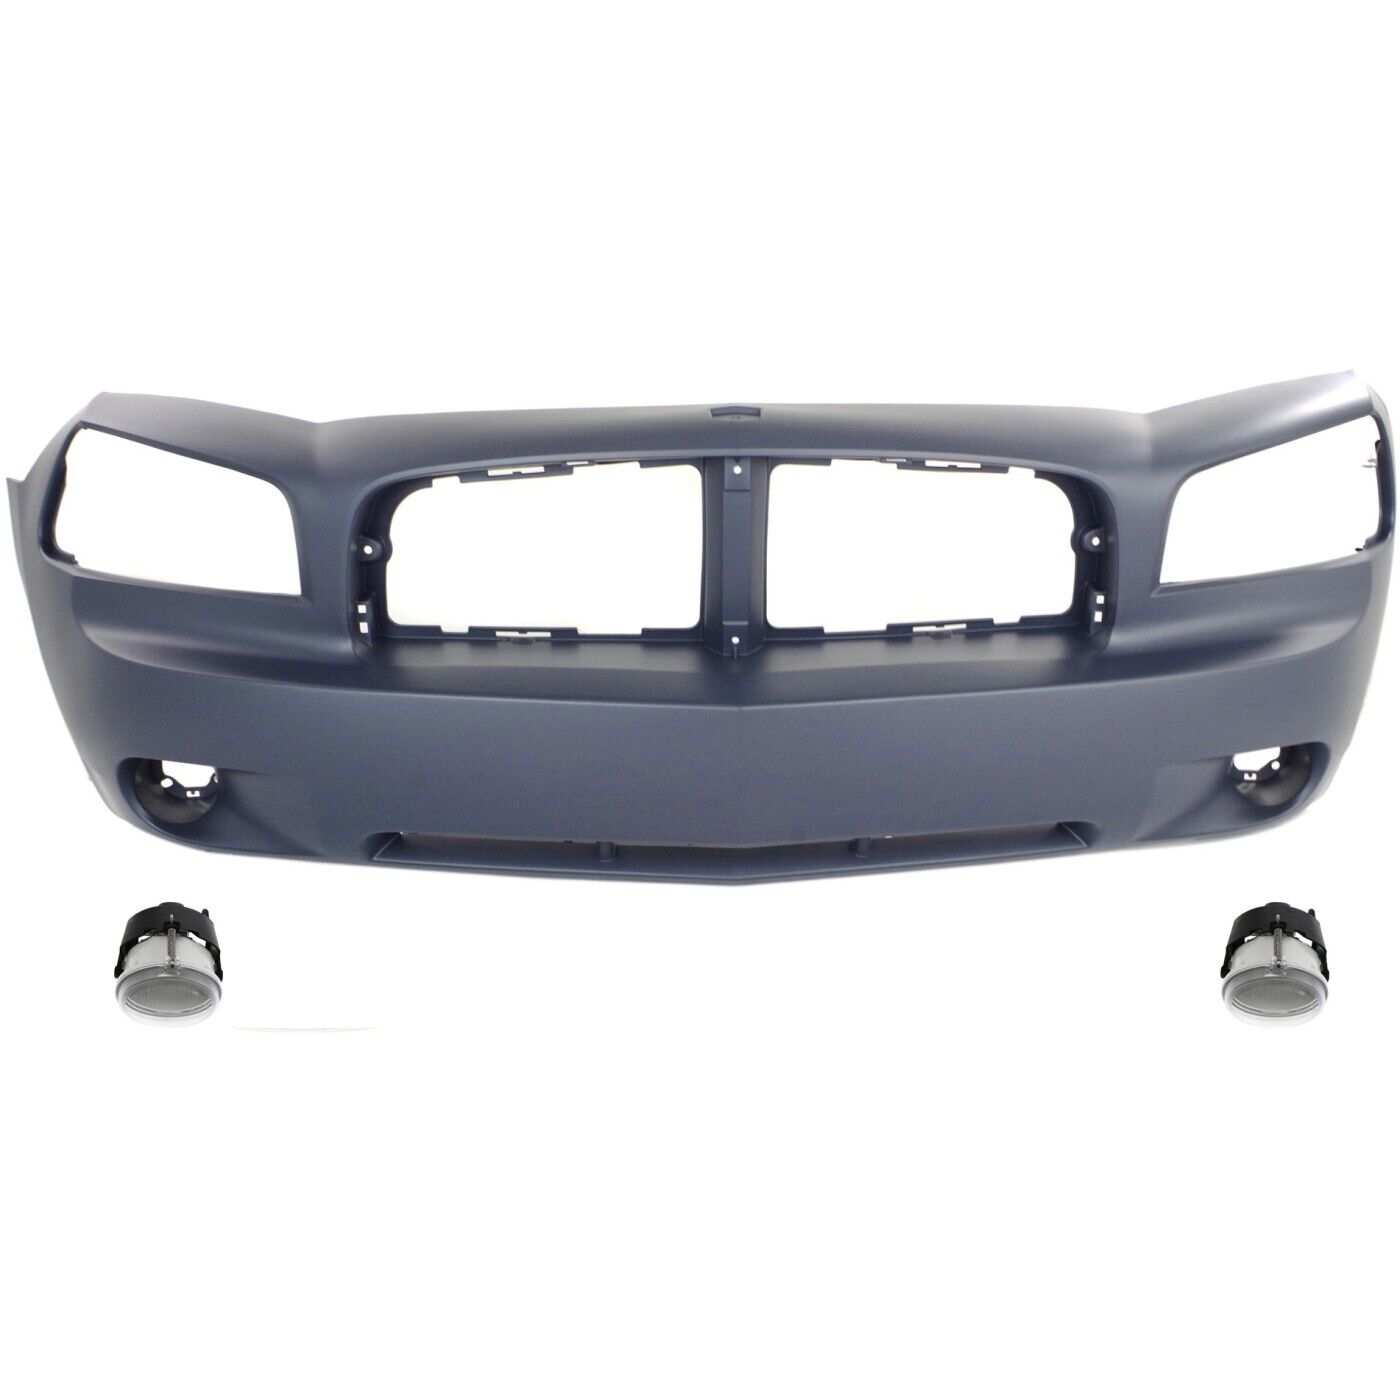 Bumper Cover Fascias Kit For 2006-2009 Dodge Charger Front with Fog Lights